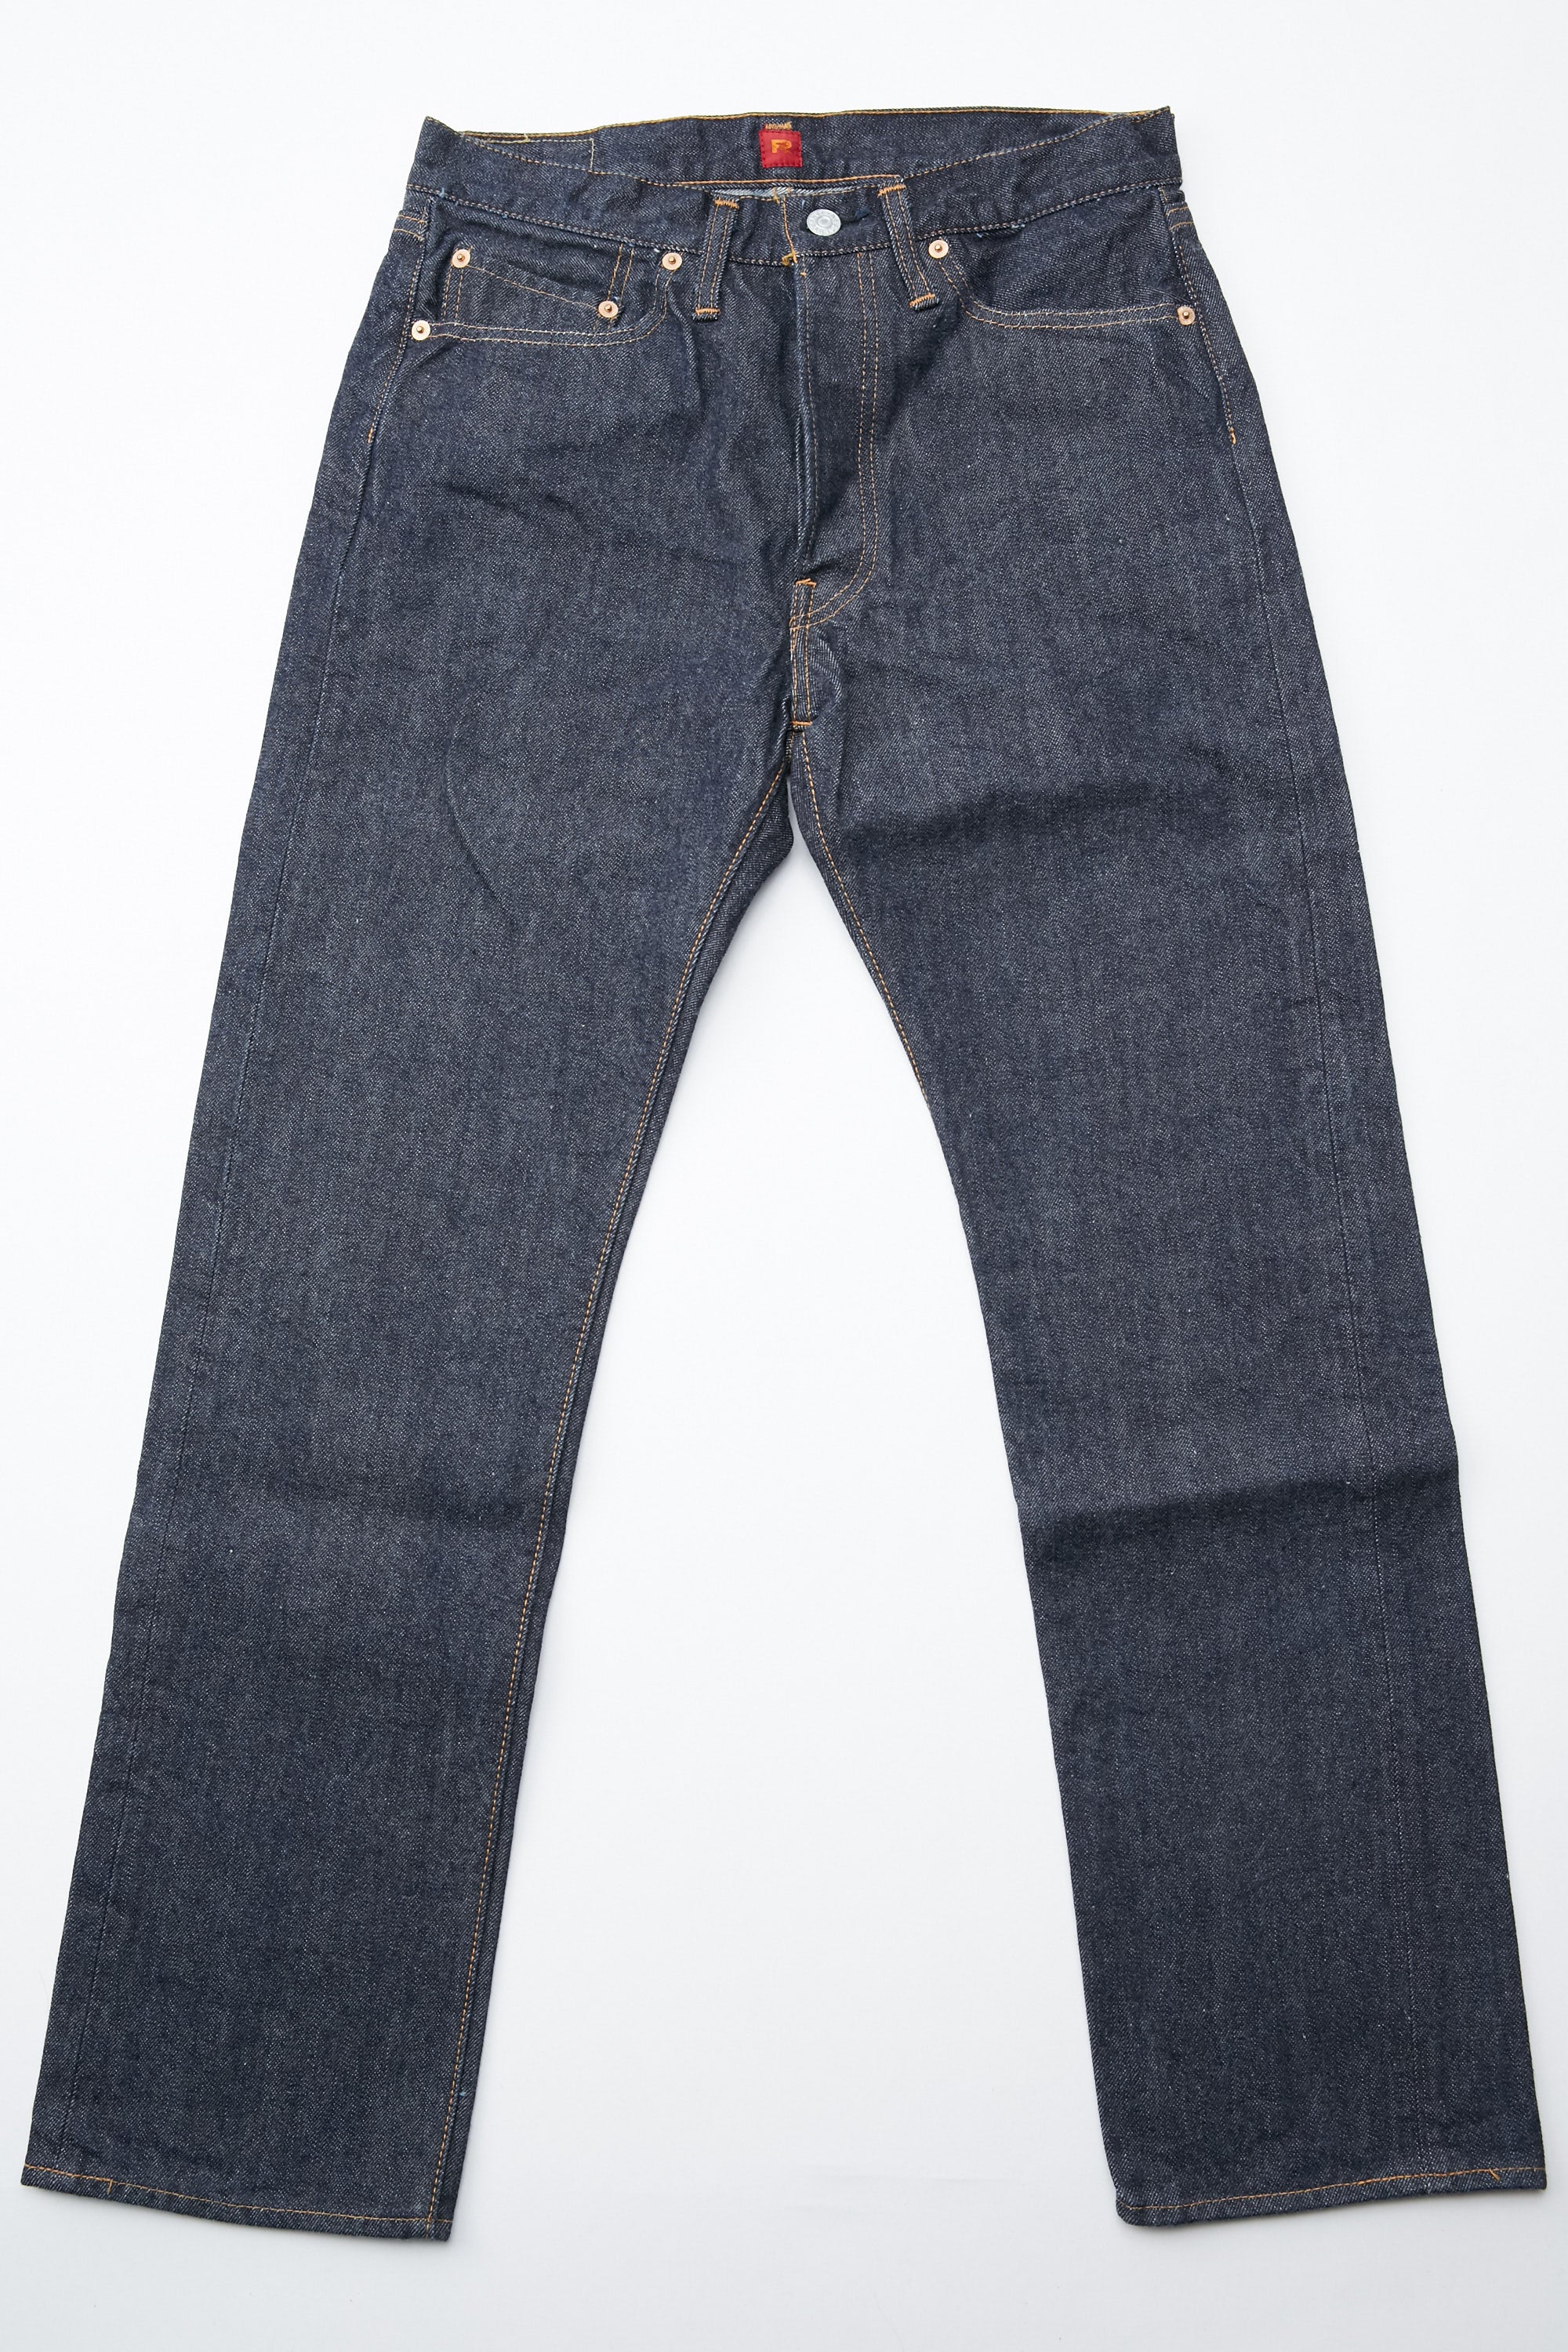 resolute 710 jeans